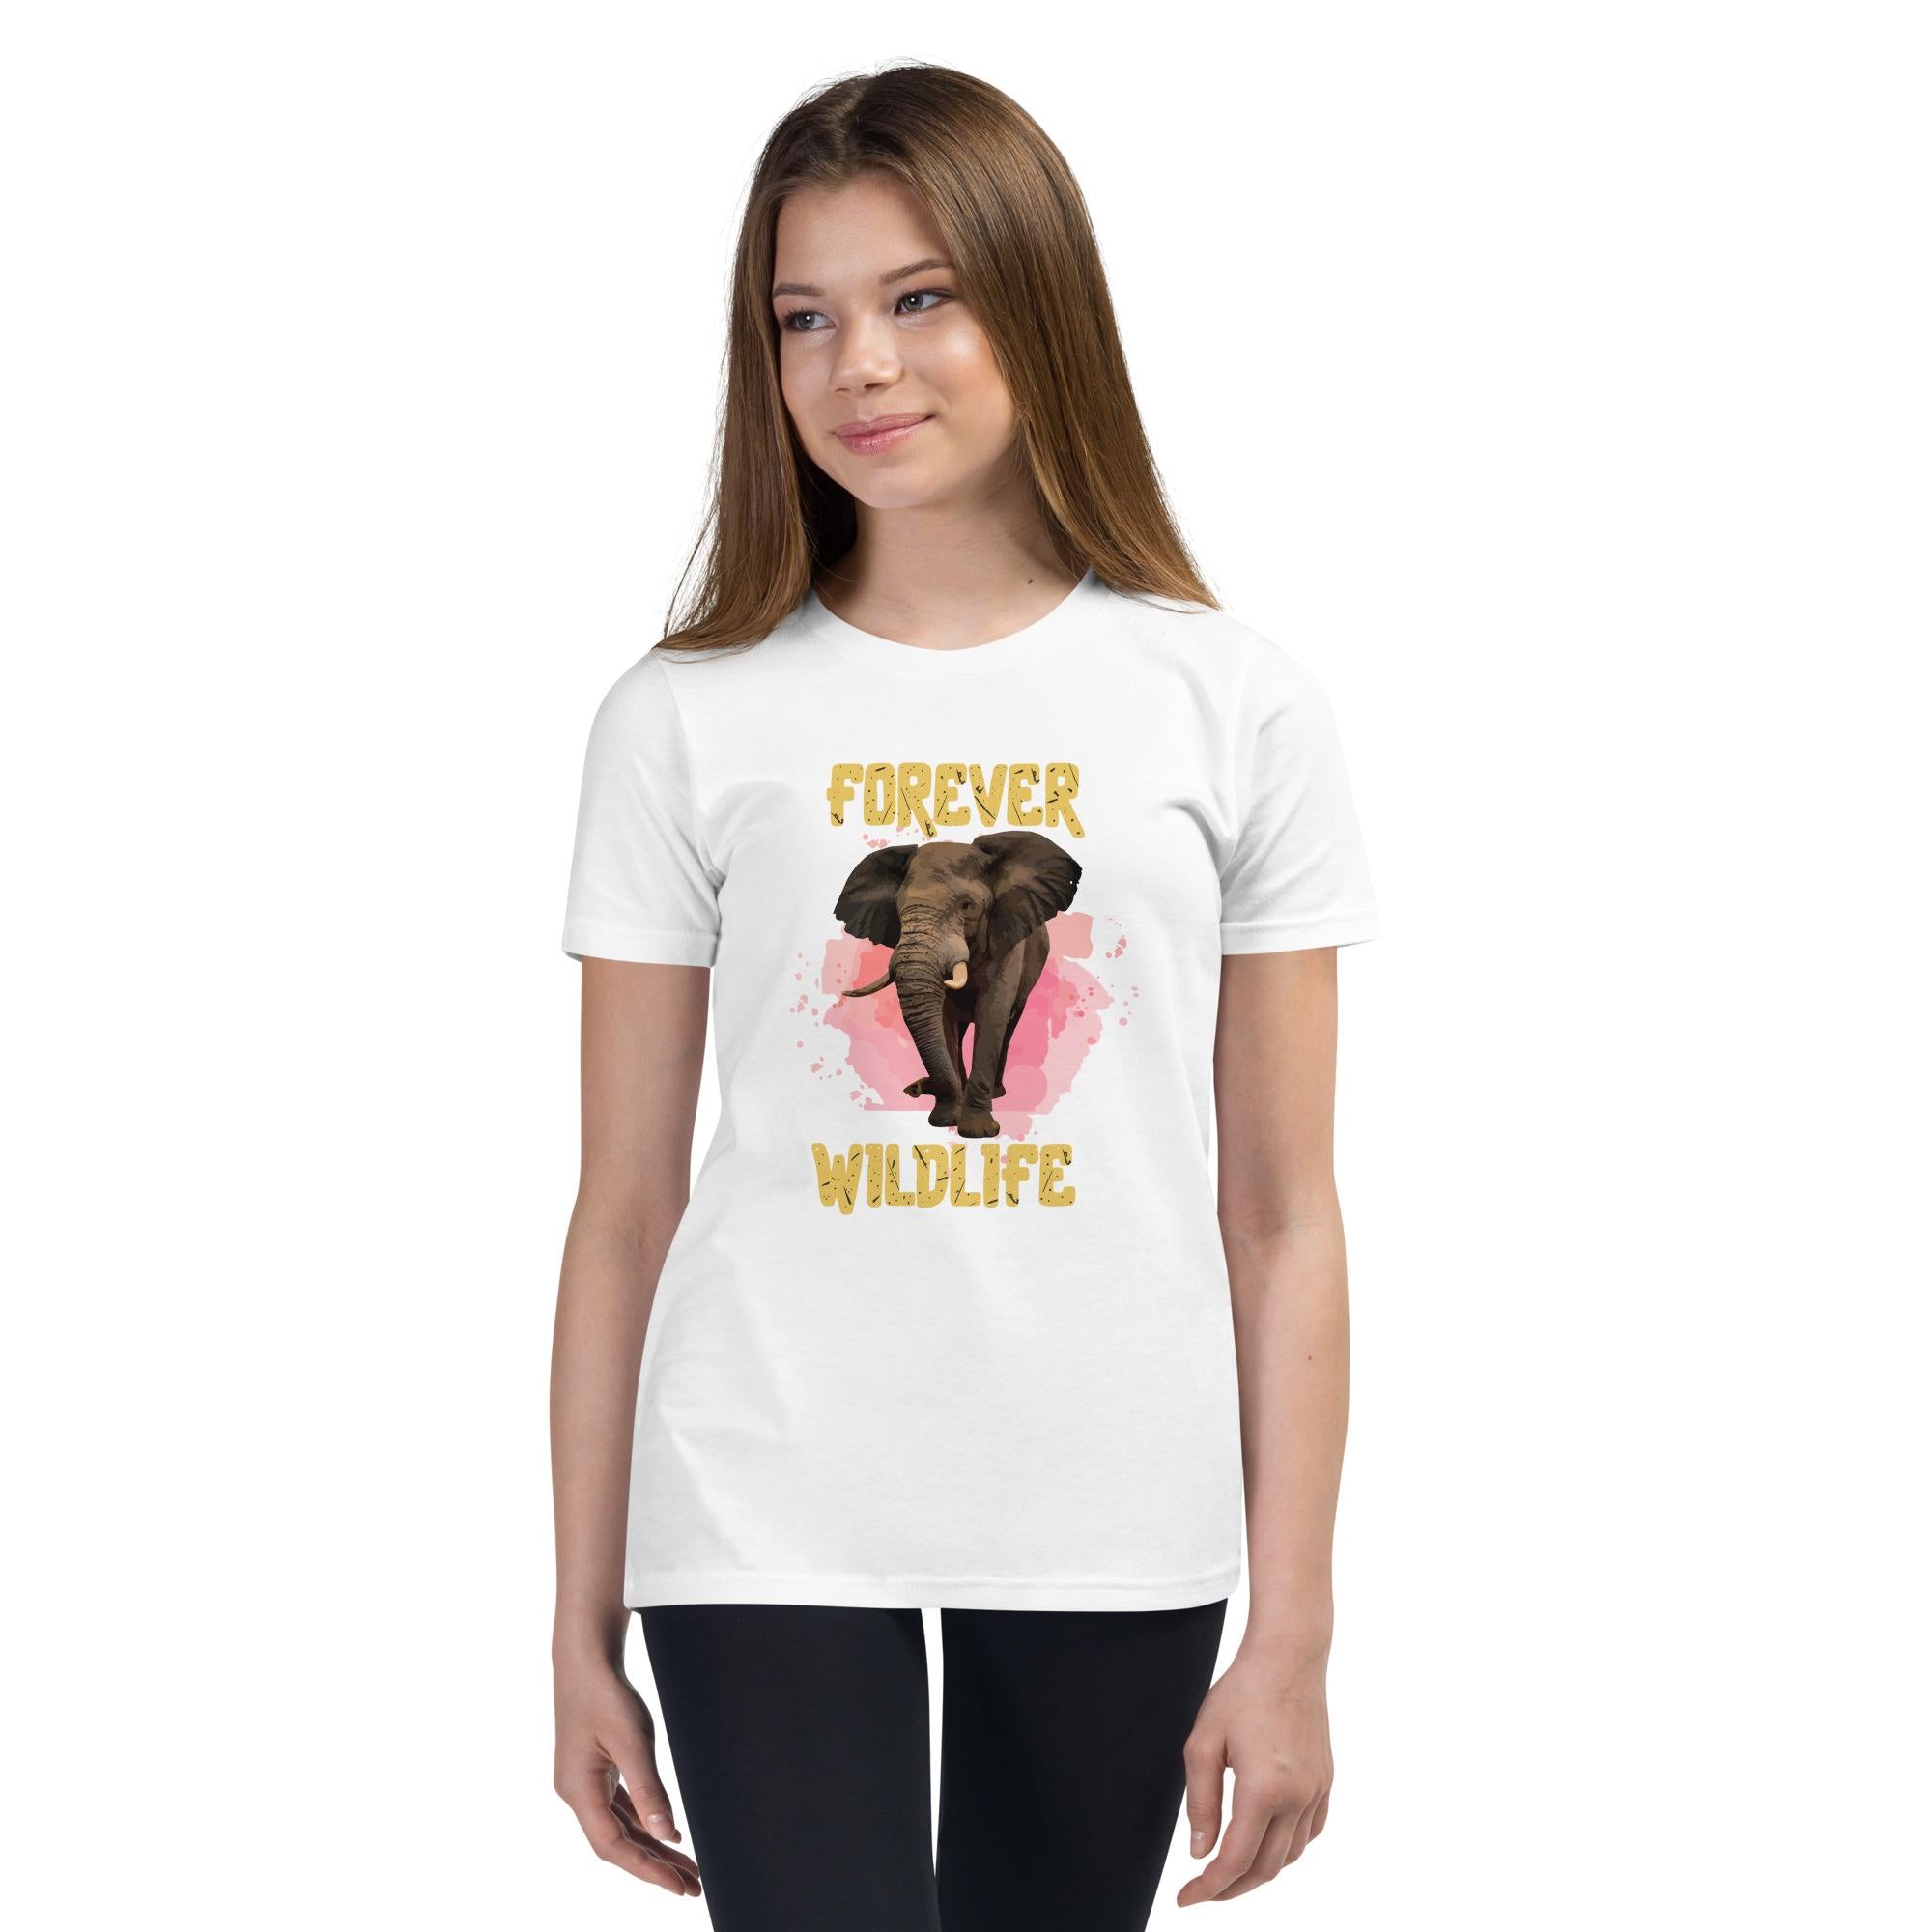 Teen wearing White Youth T-Shirt with Elephant graphic as part of Wildlife T Shirts, Wildlife Clothing & Apparel by Forever Wildlife